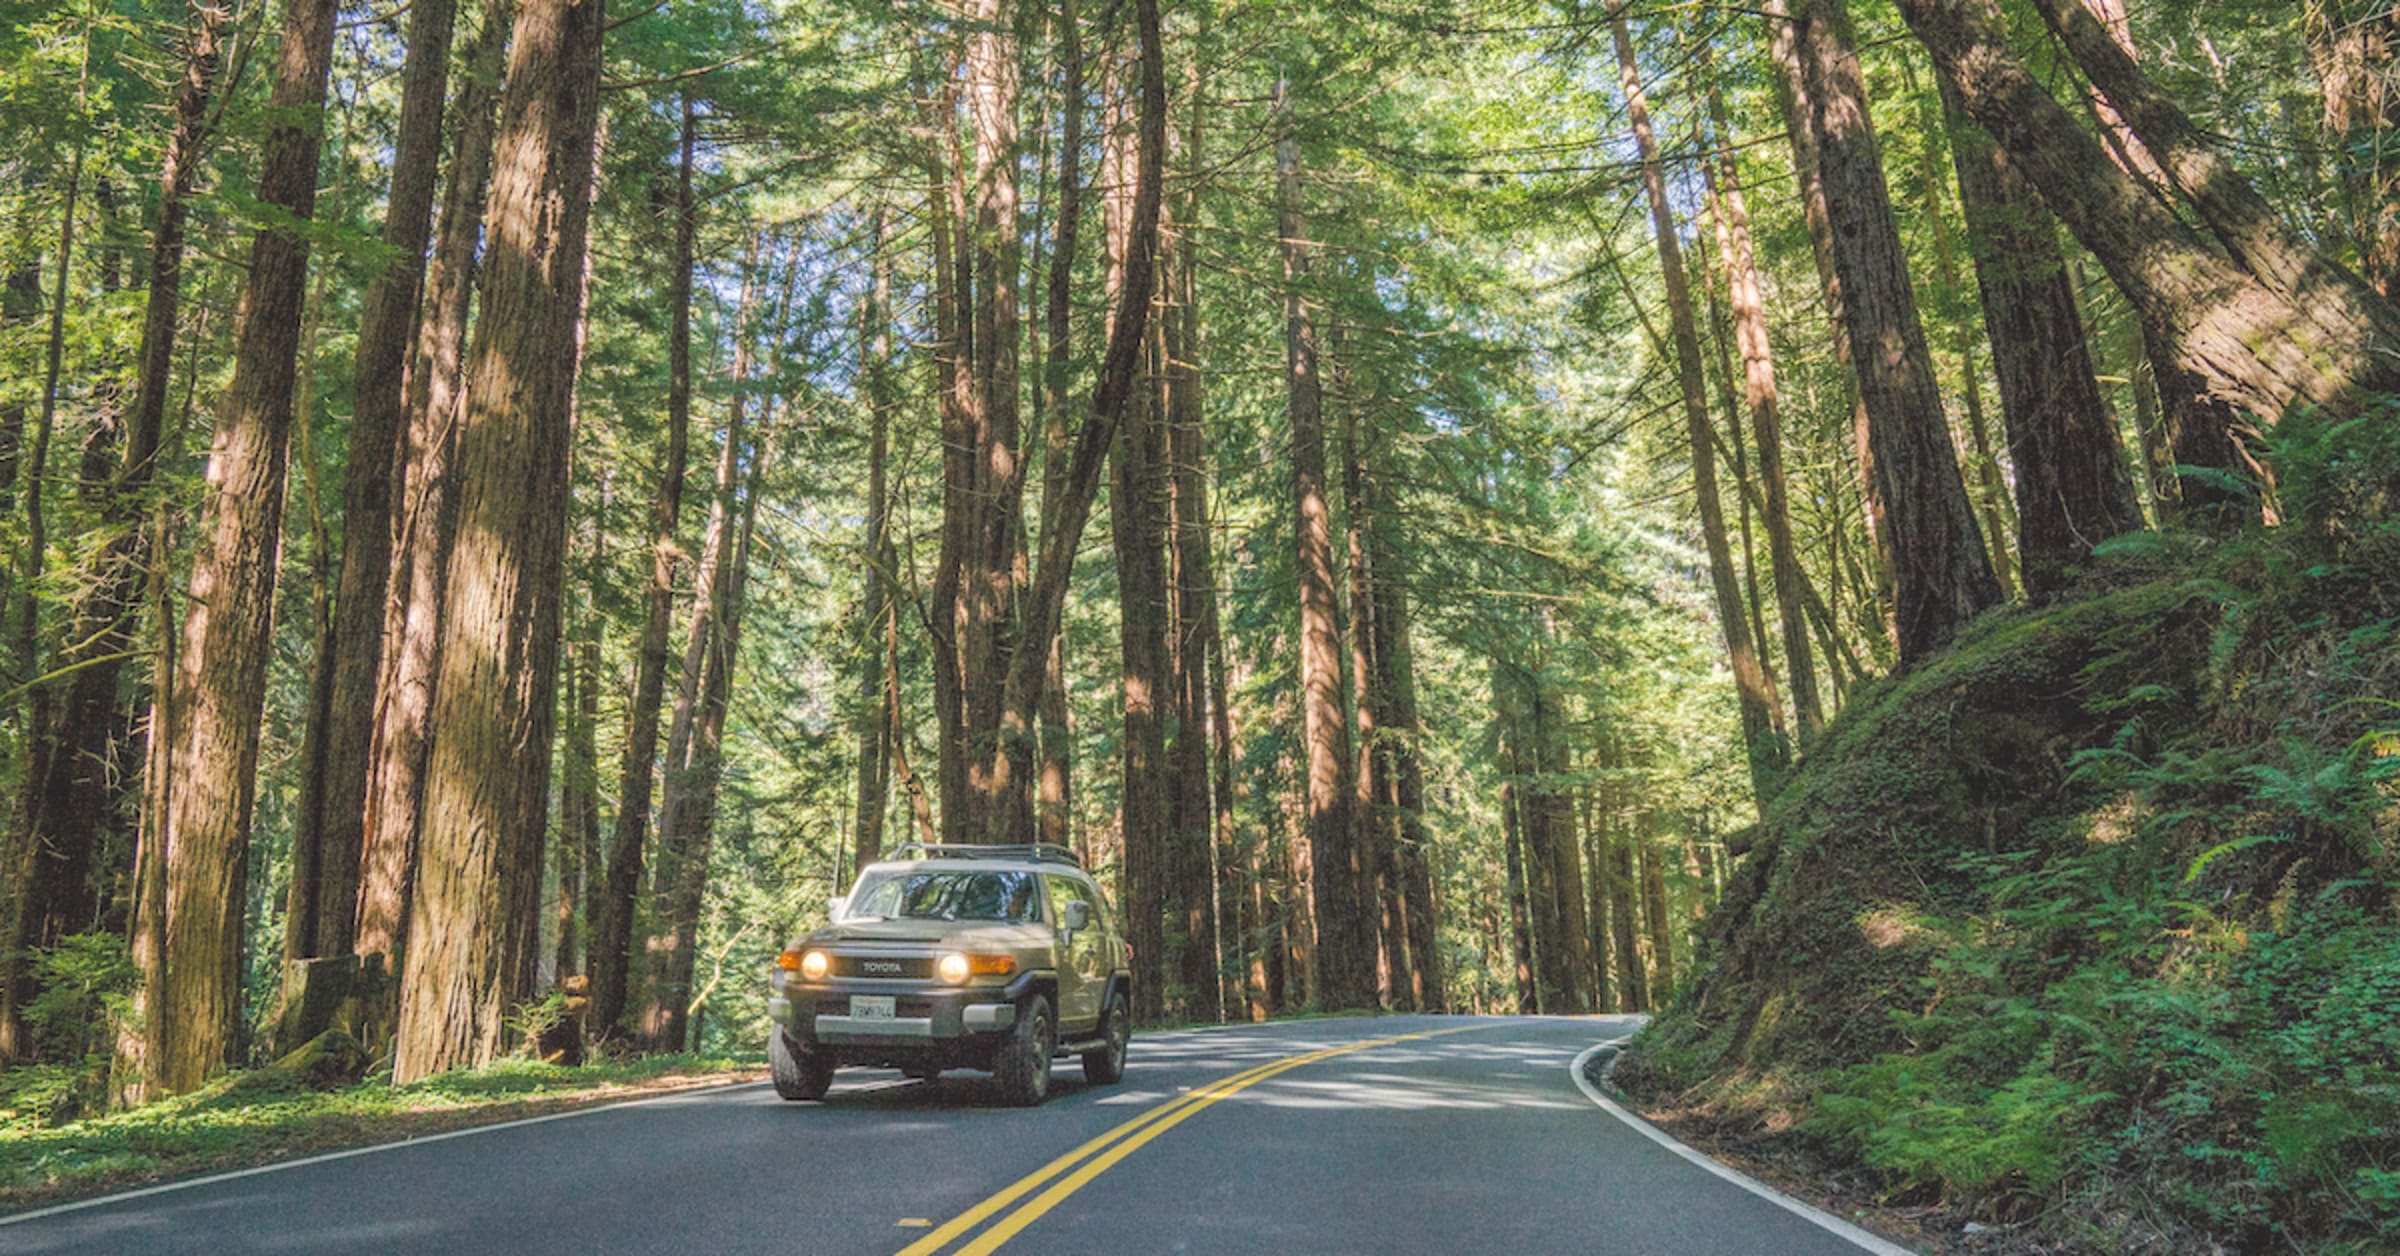 Tips for road trip camping